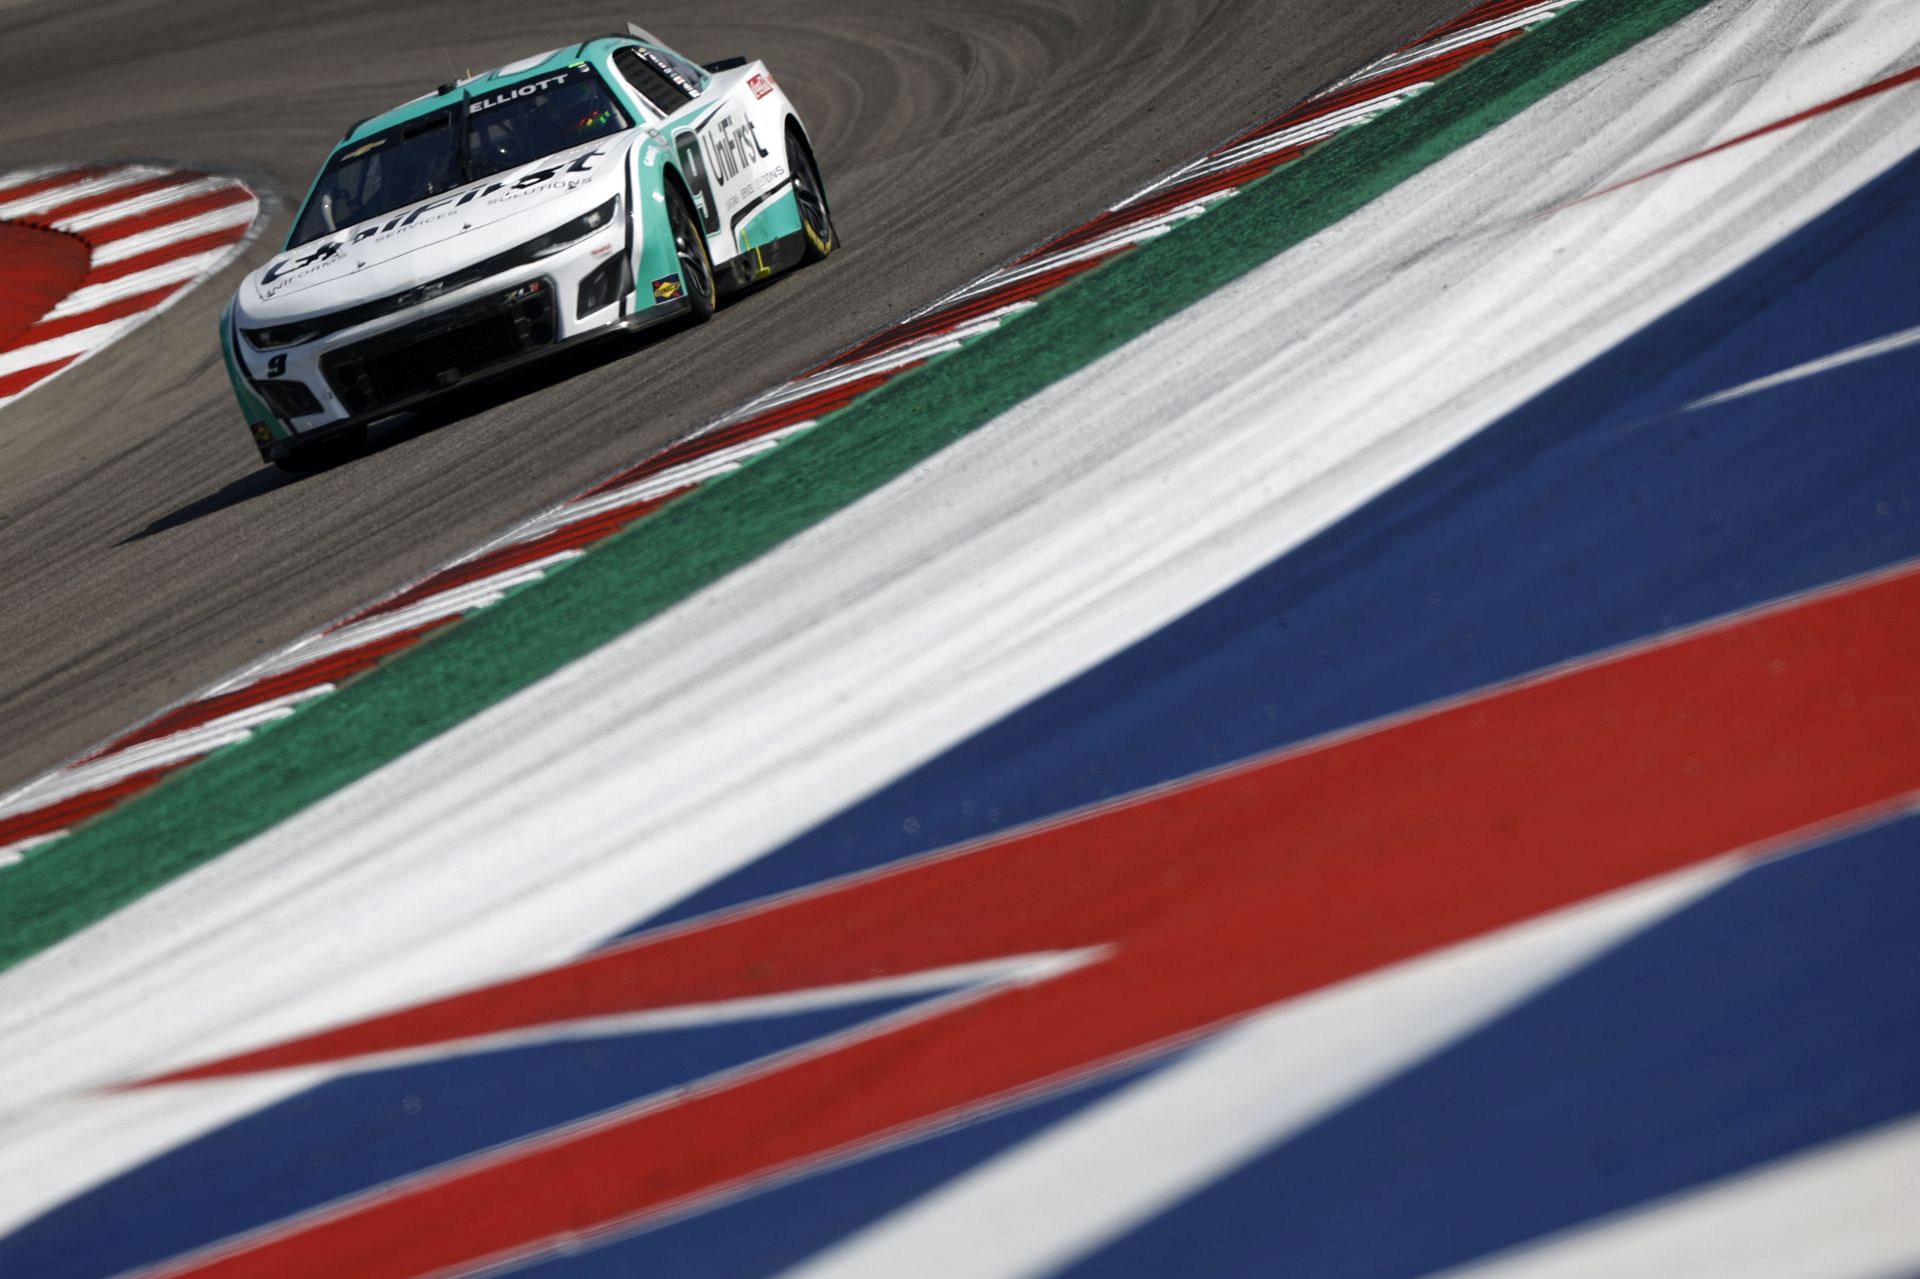 The road course ringers get rung at COTA